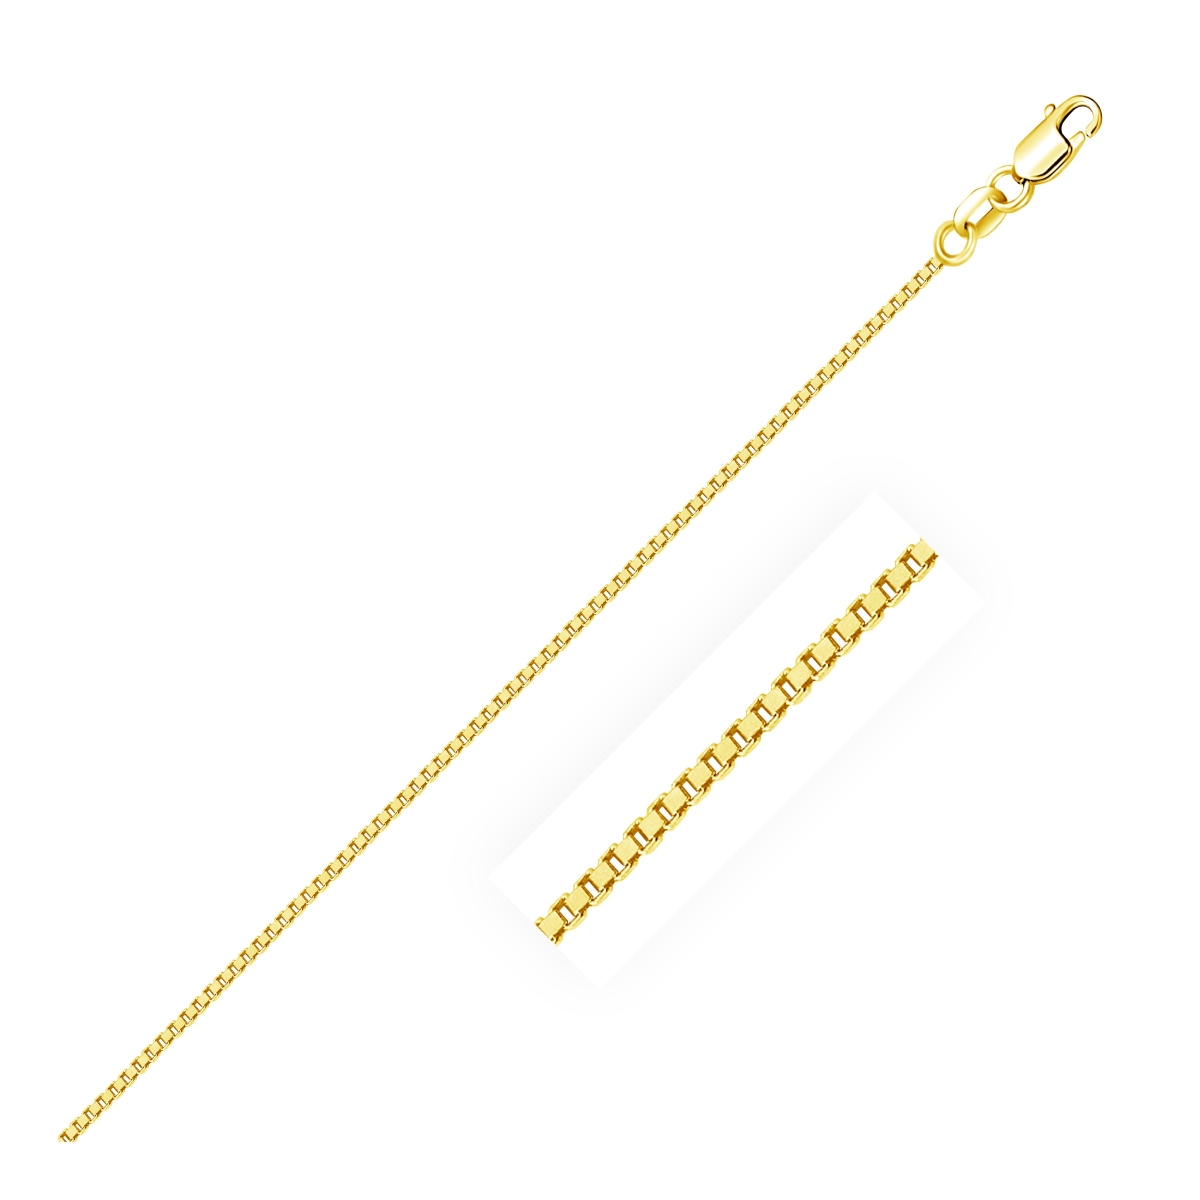 D183927-20 14k Yellow Gold Classic Box Chain, 1 Mm - Size 20 In.